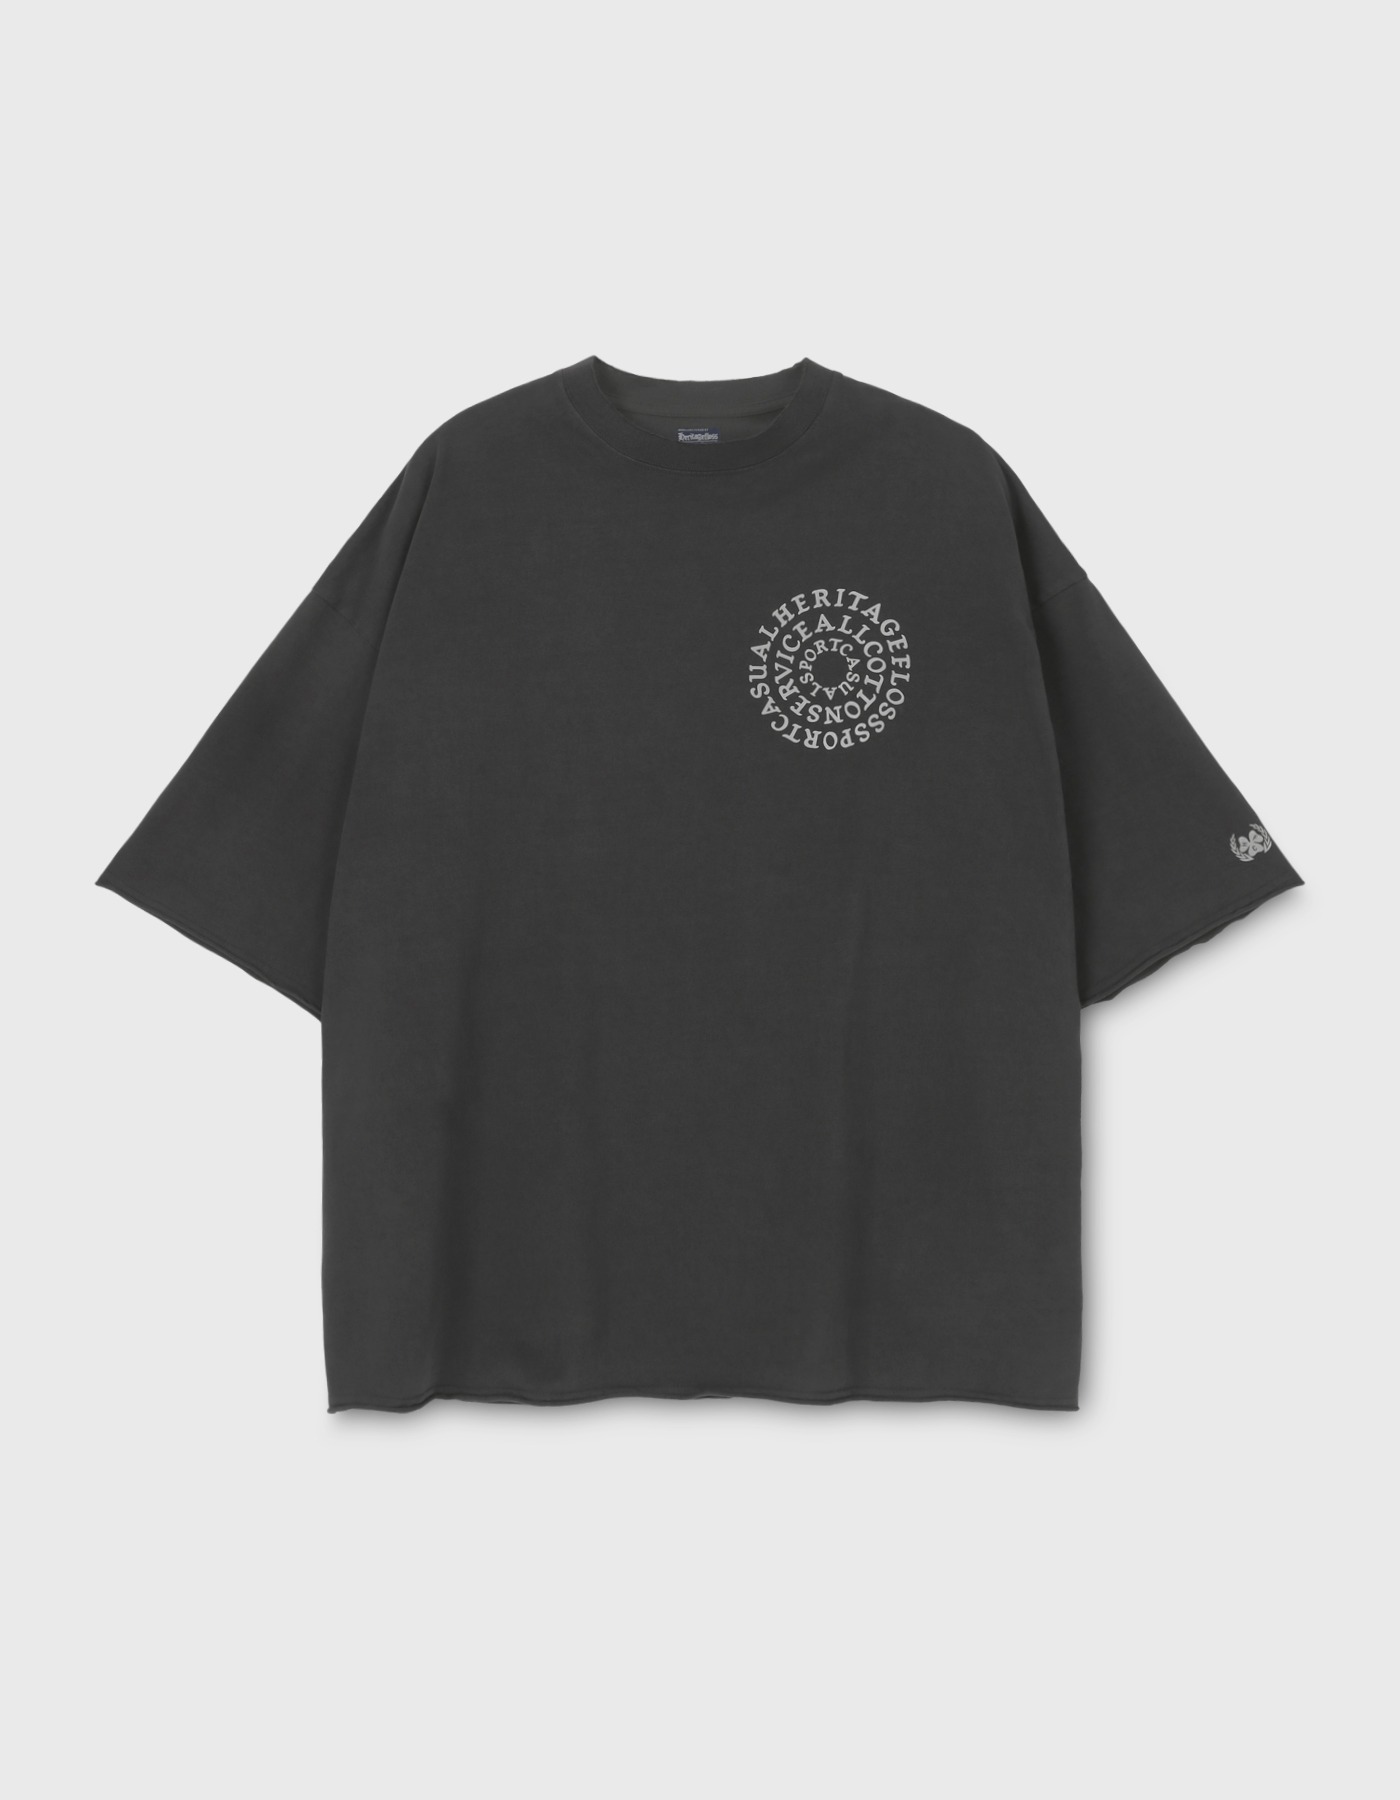 REFLECTIVE 15S GYM T-SHIRT / Charcoal